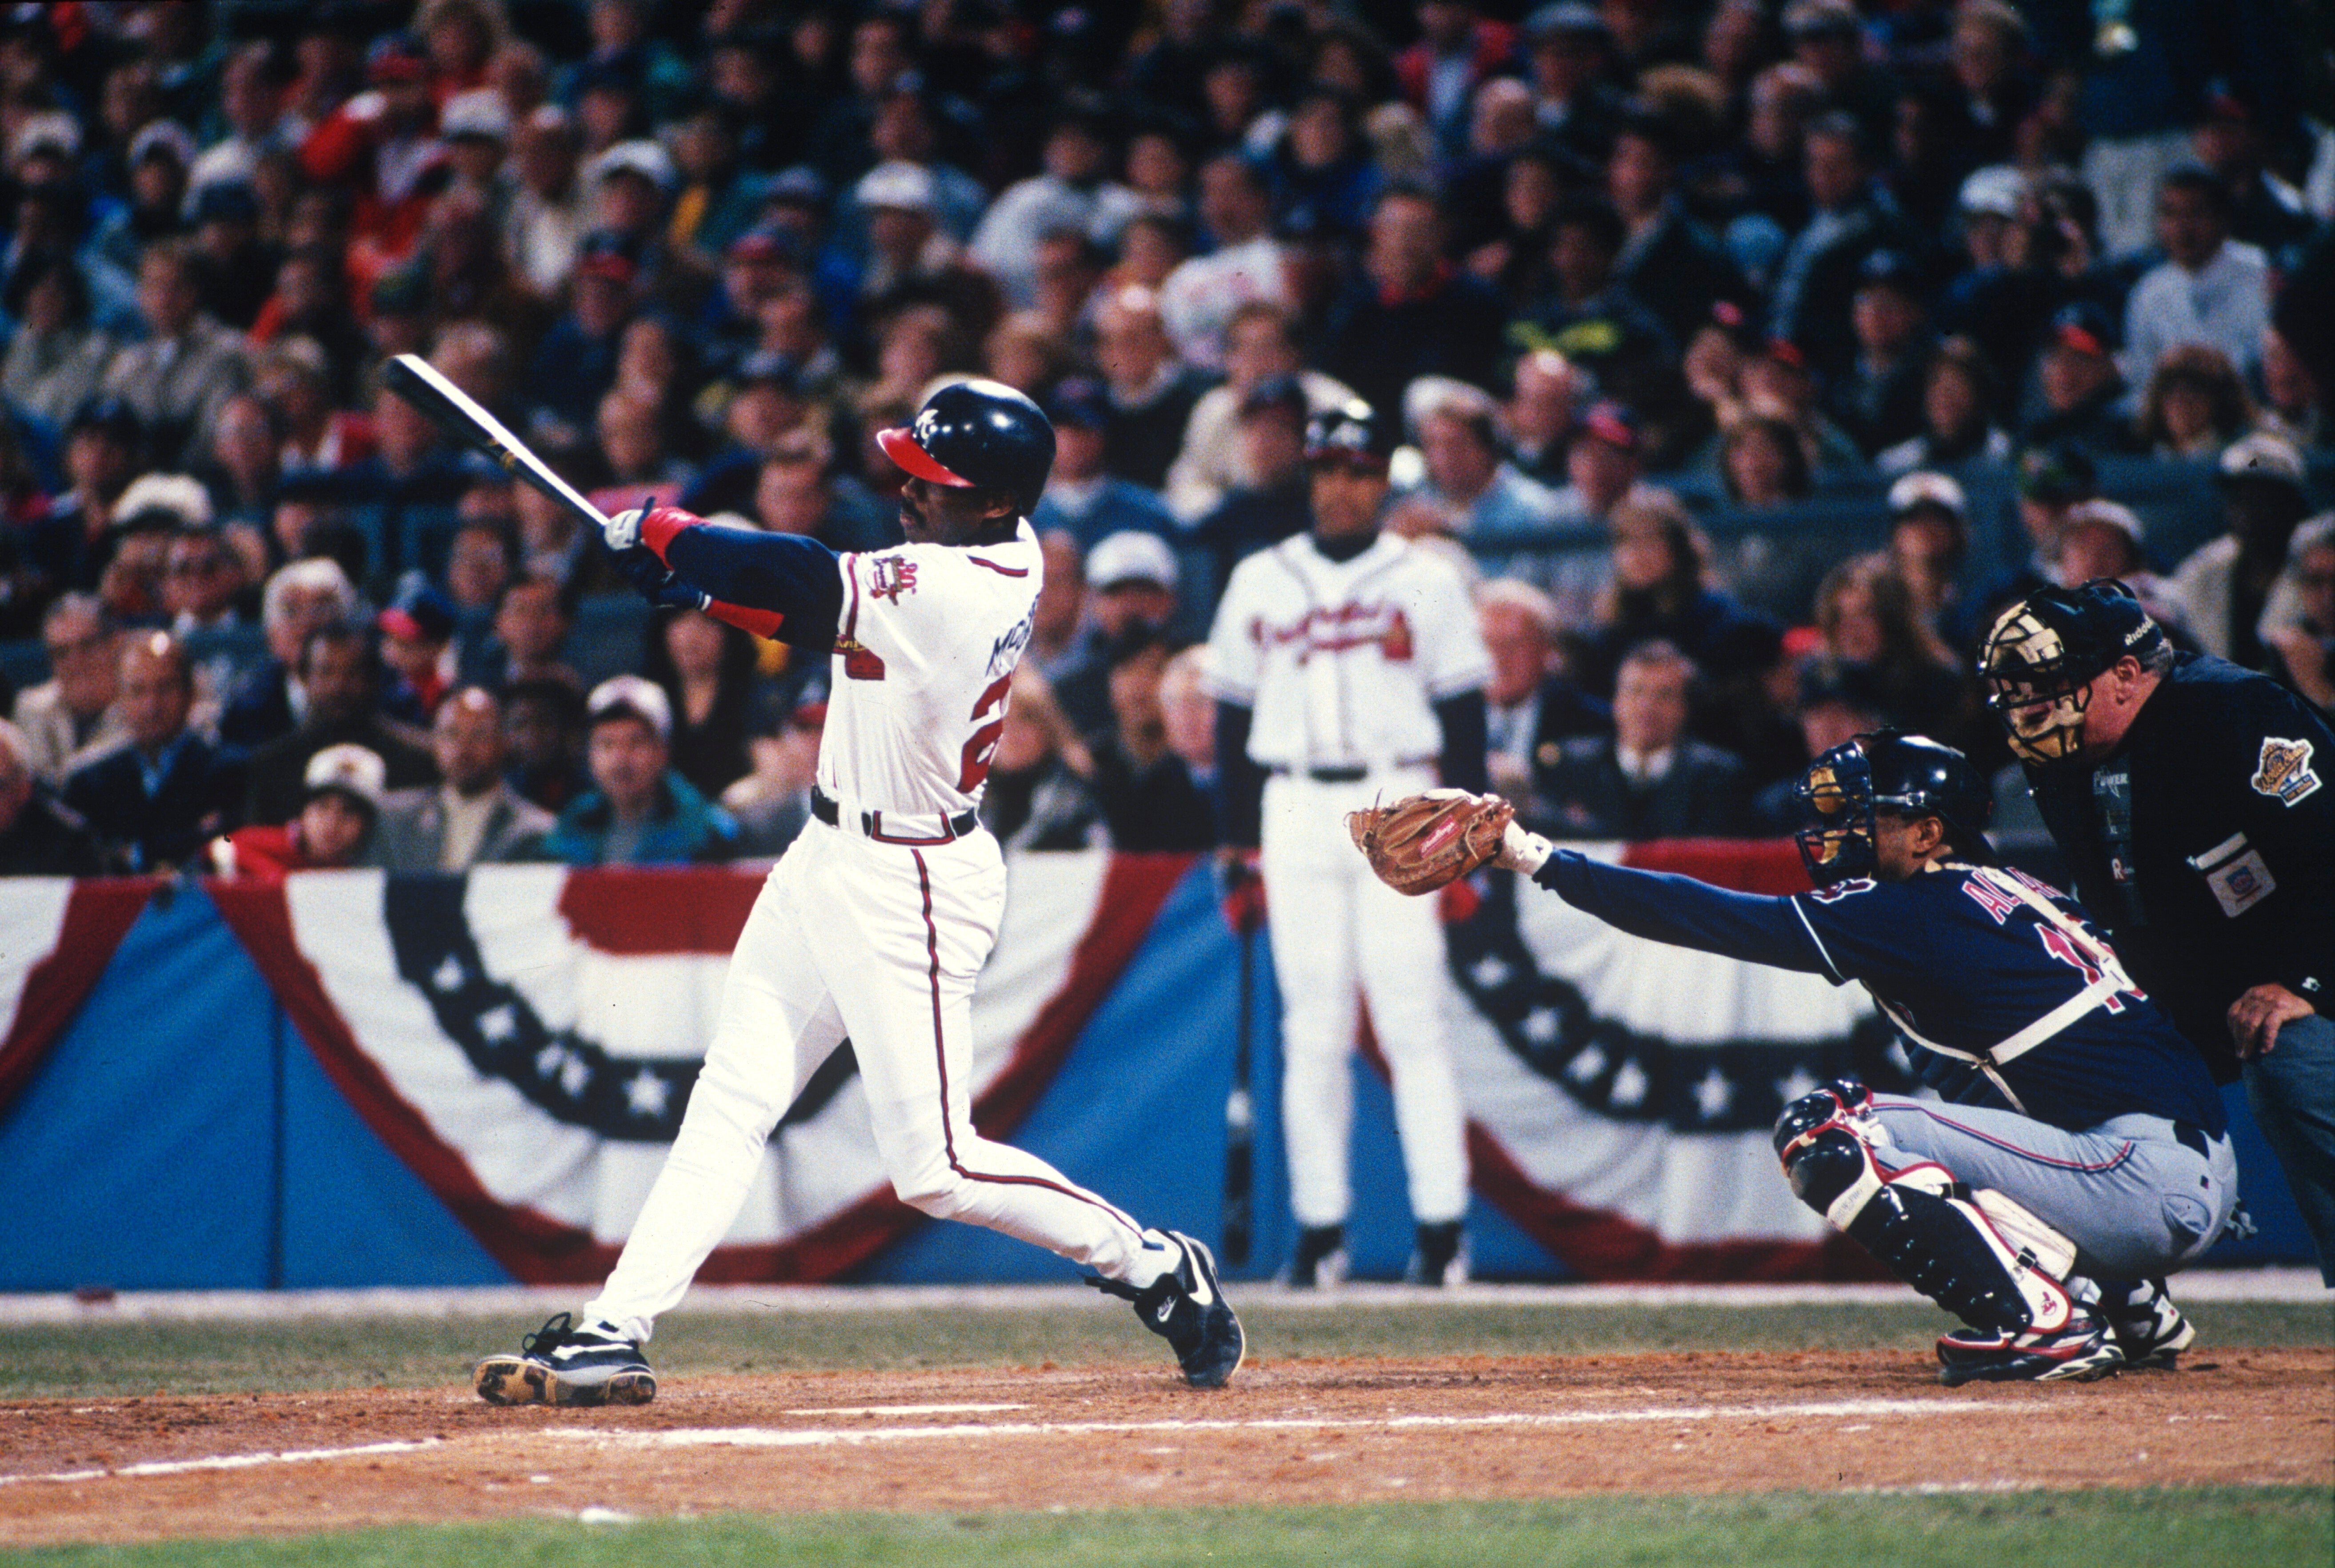 Fred McGriff: Consistently productive but short of Hall of Fame